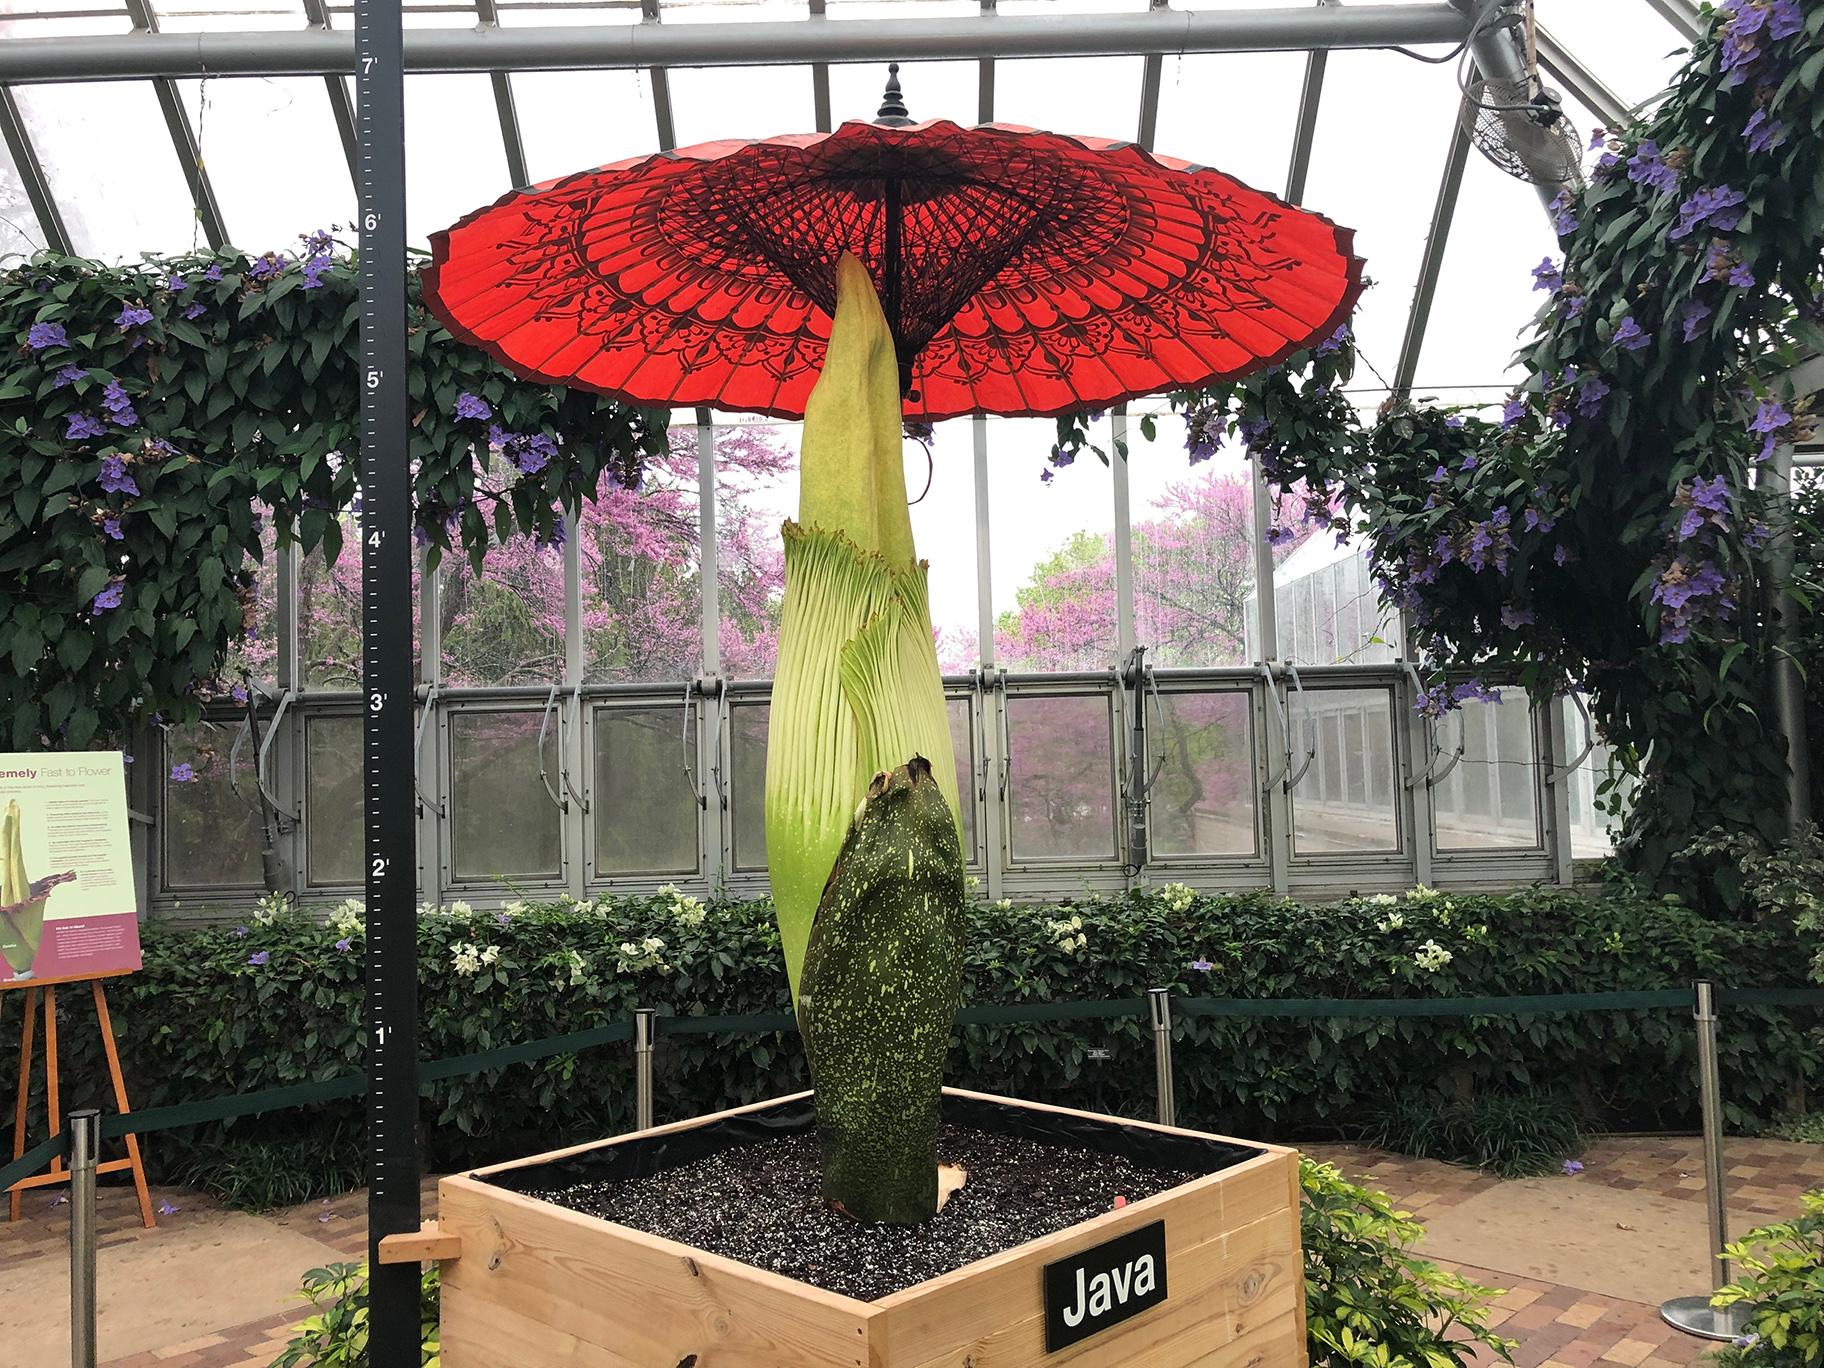 Java the corpse flower is covered by an umbrella at Chicago Botanic Garden. Corpse flowers are native to the underbrush of tropical rainforest in Indonesia and therefore can get sunburnt when exposed directly to the sun. (Alex Ruppenthal / WTTW News)